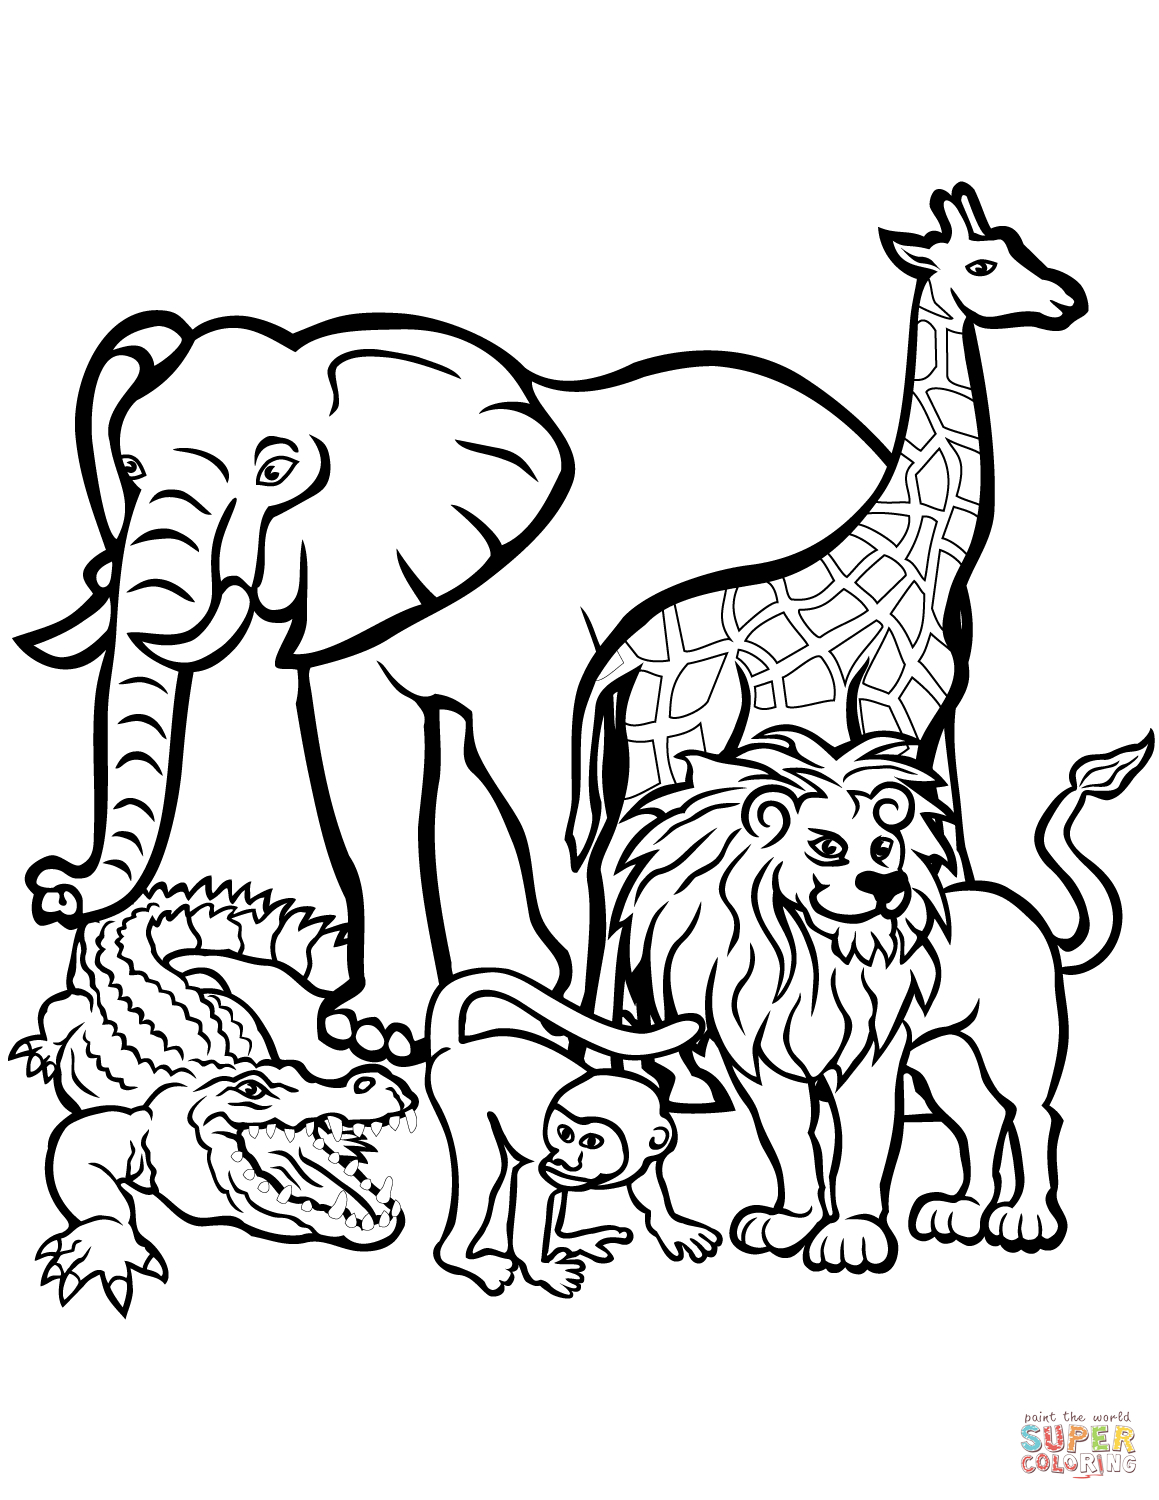 Zoo Animal Coloring Pages / Coloring Page Lion And Friends San Diego